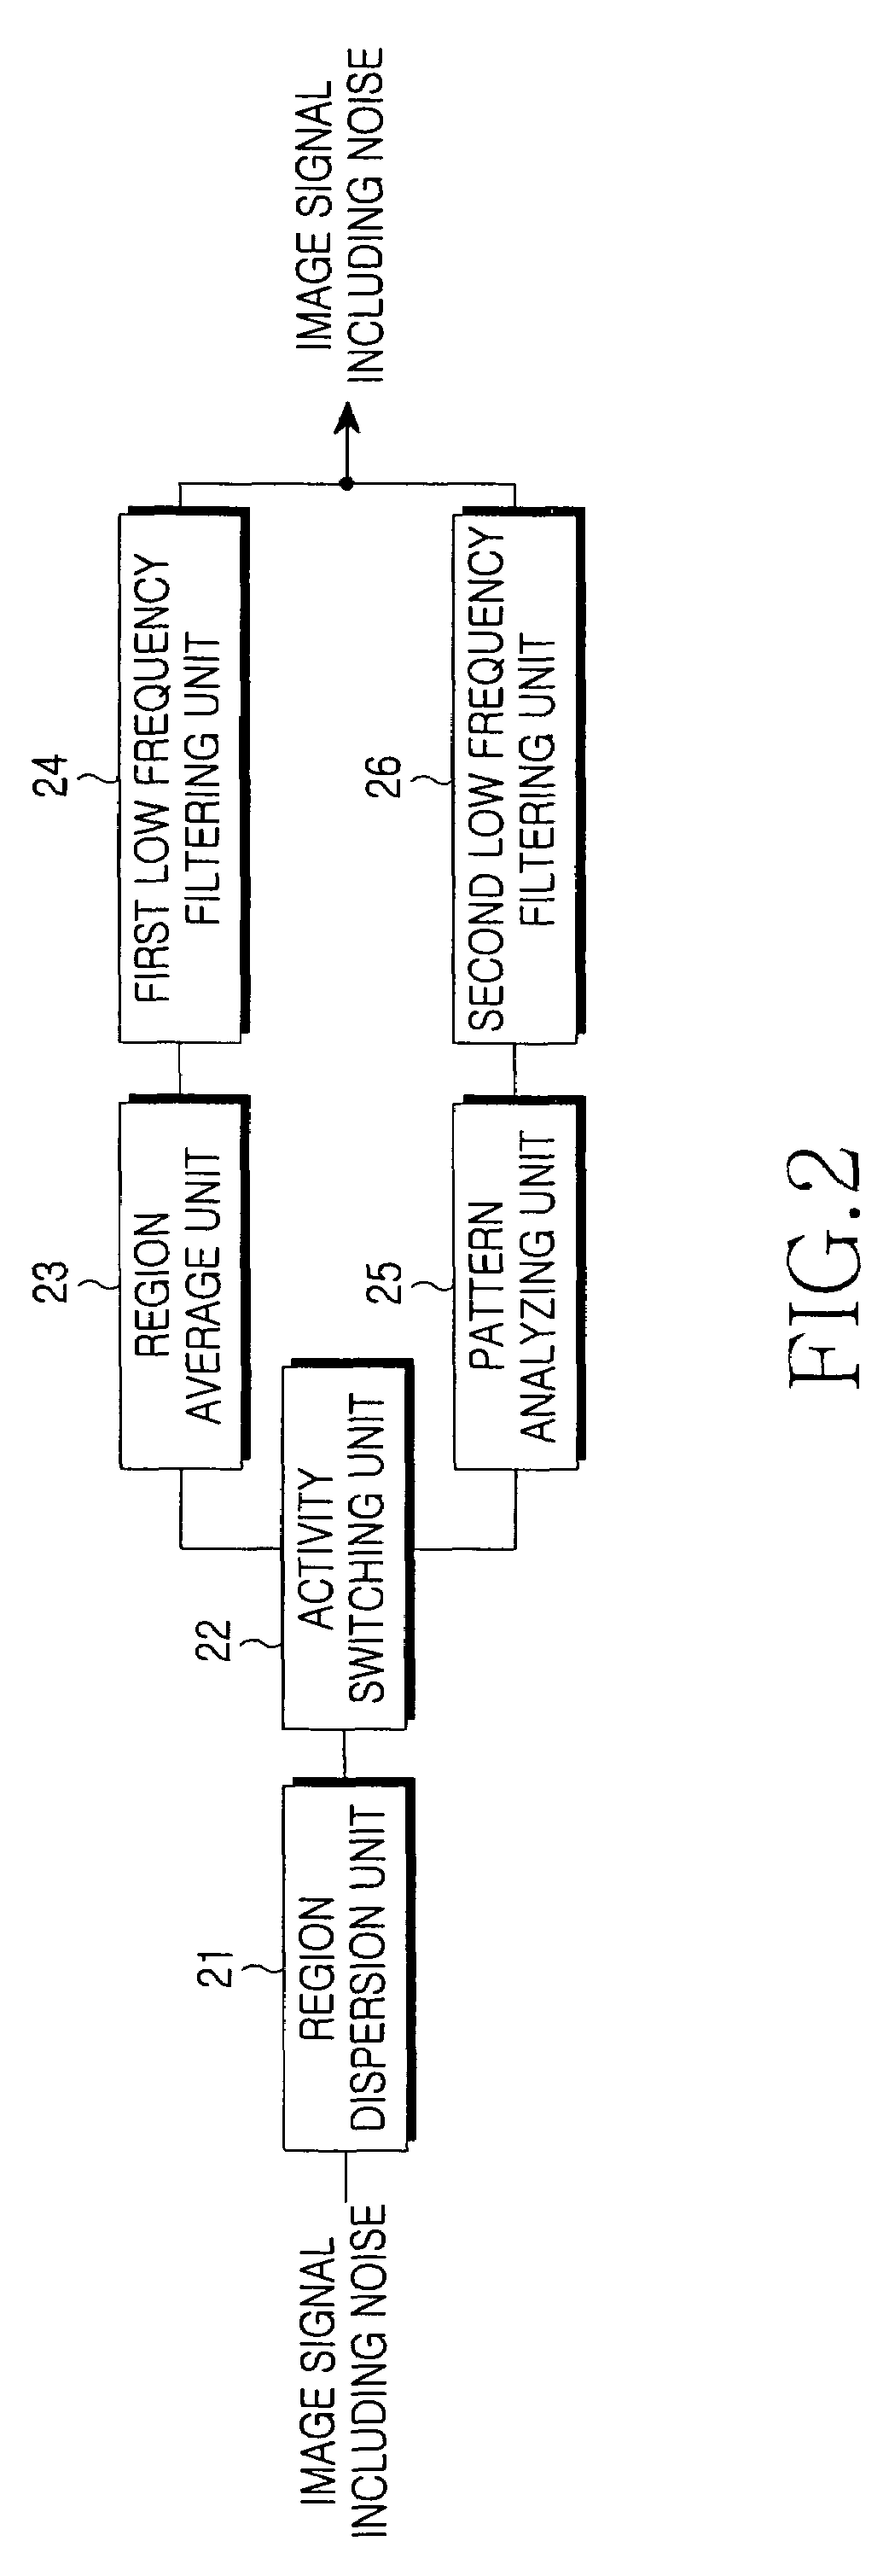 Method for filtering image noise using pattern information